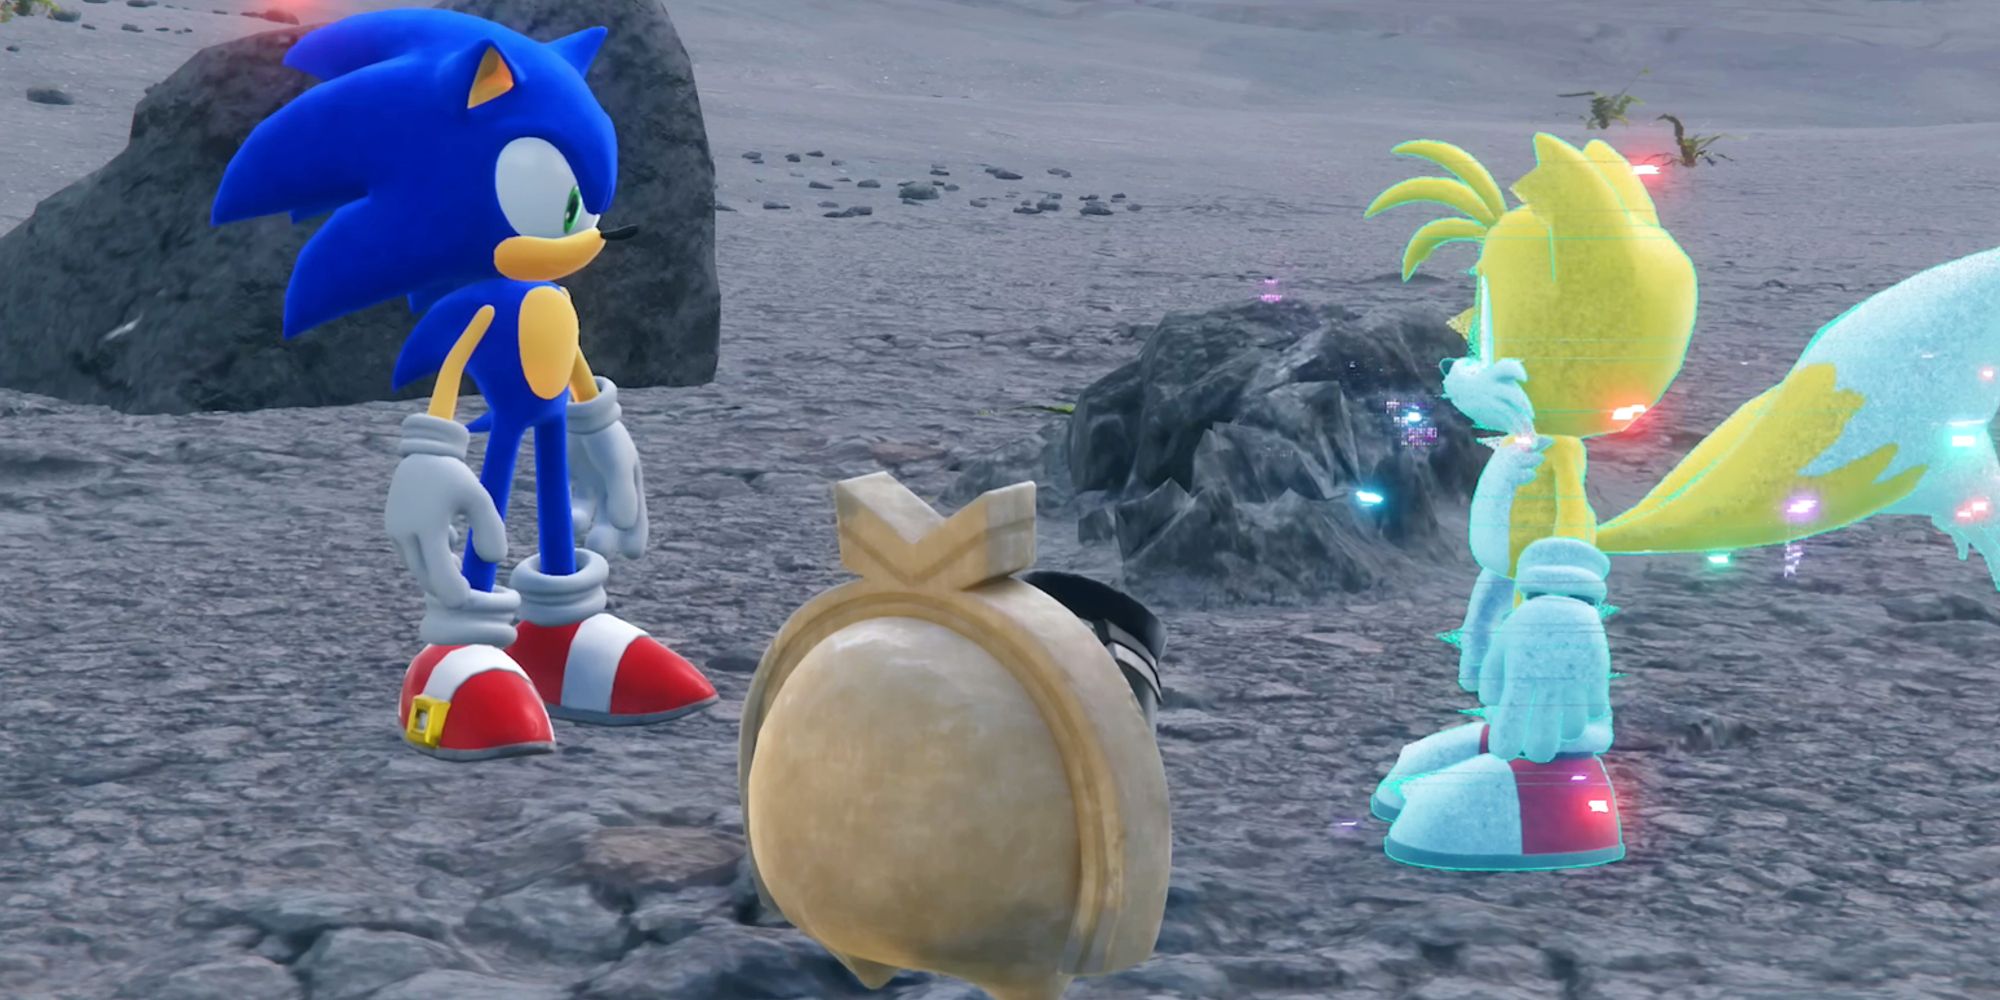 Sonic and Tails discuss what to do about the tiny stone Koco sandwiched between them on Chaos Island.